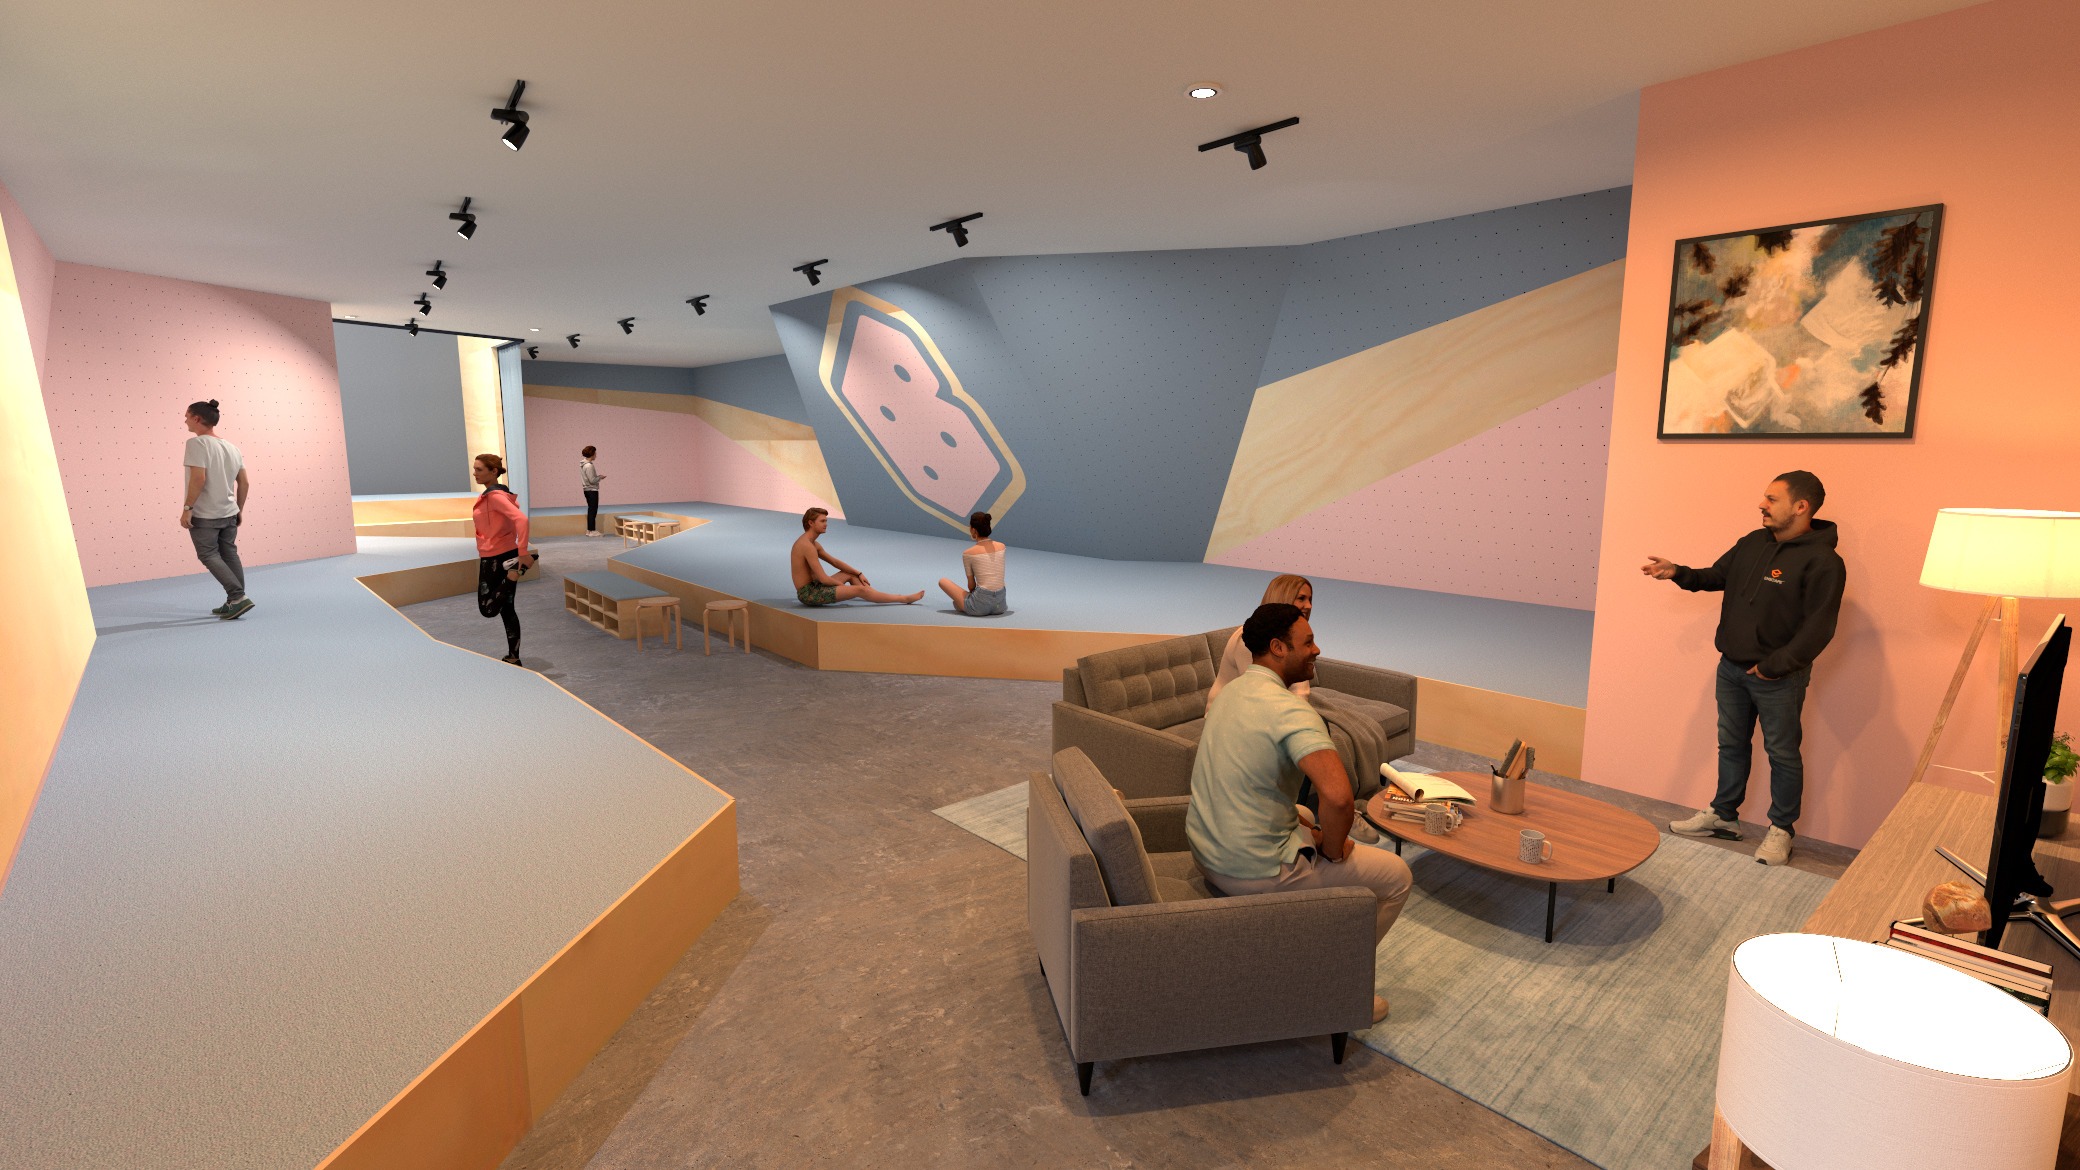 A rendering of a boukder hall room with people in it.